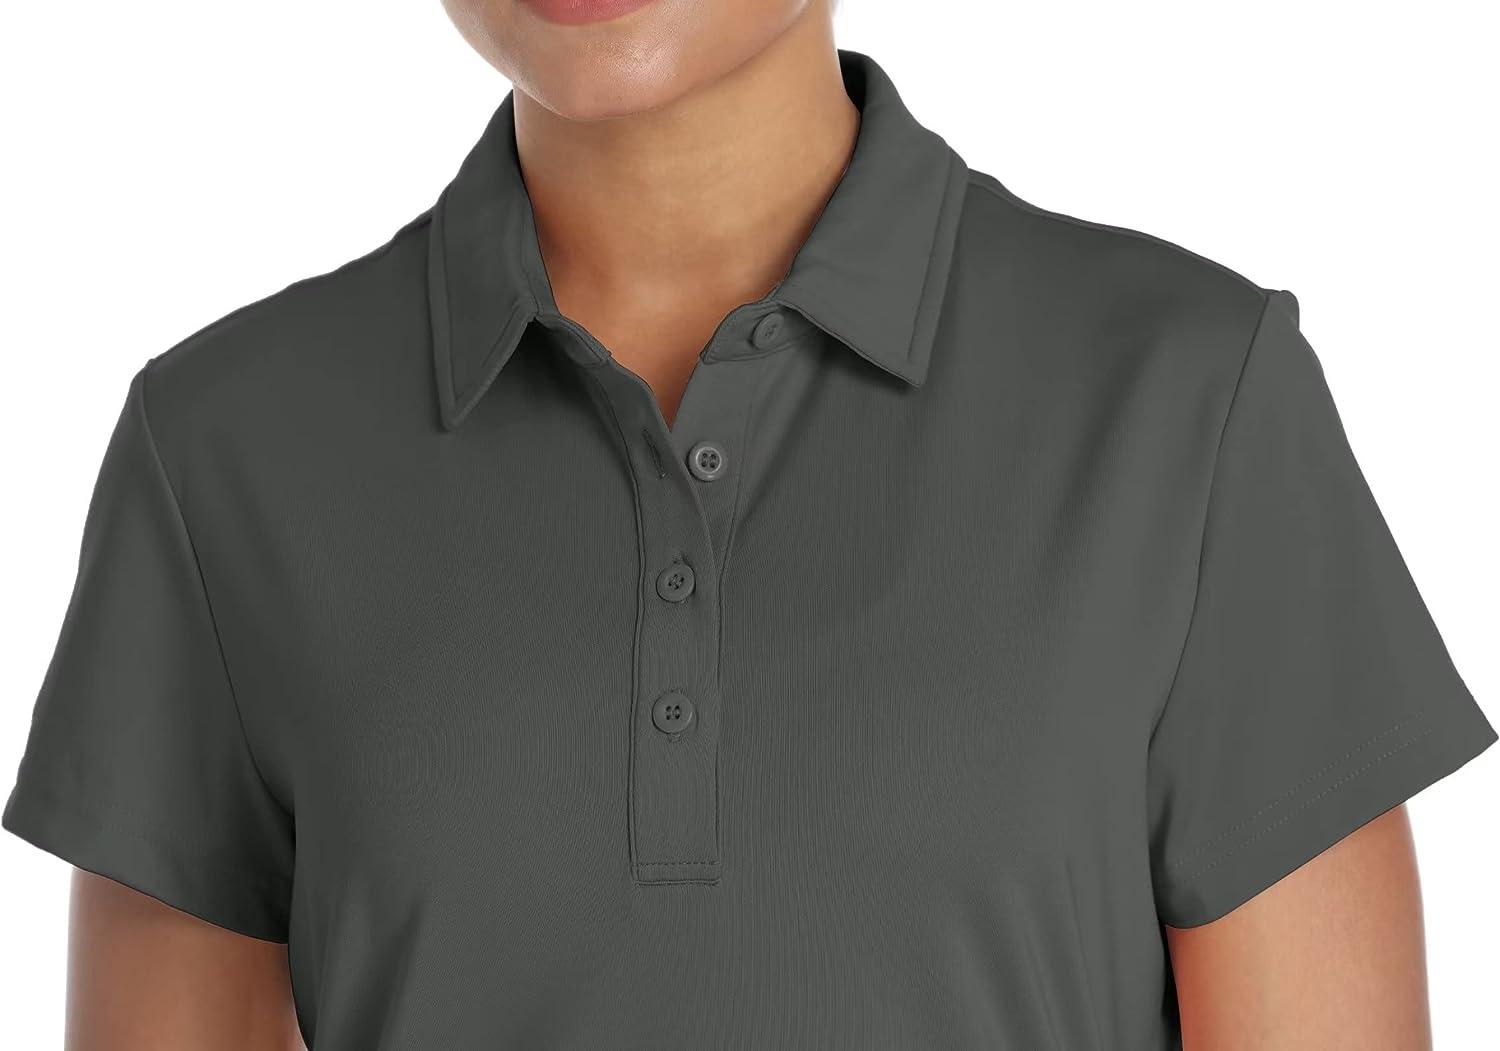 MAGCOMSEN Women's Polo Shirts UPF 50+ Sun Protection 4 Buttons